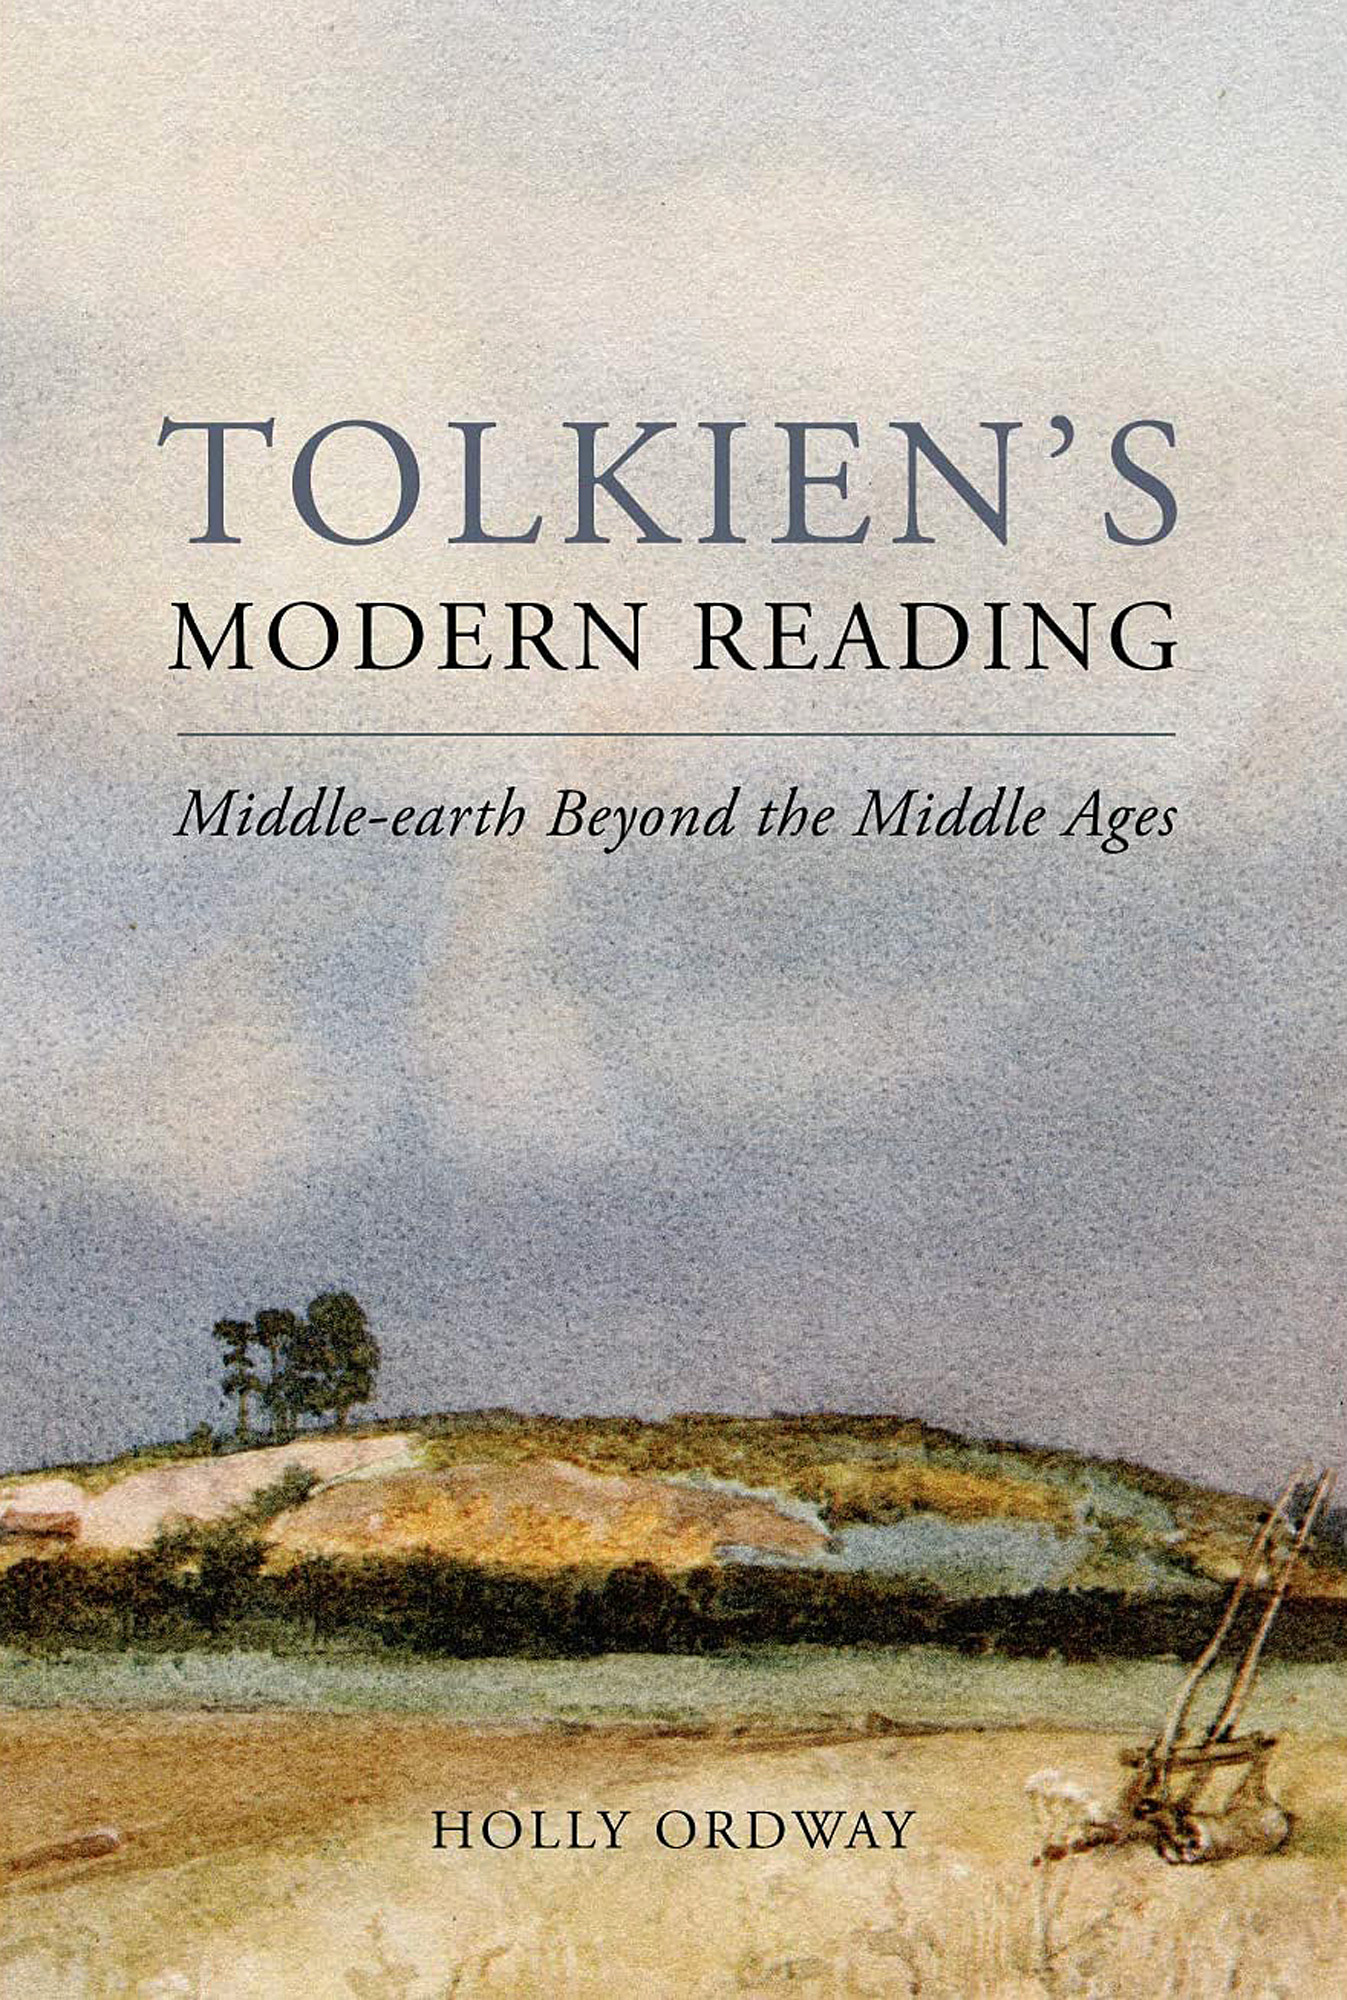 News – Middle-earth & J.R.R. Tolkien Blog